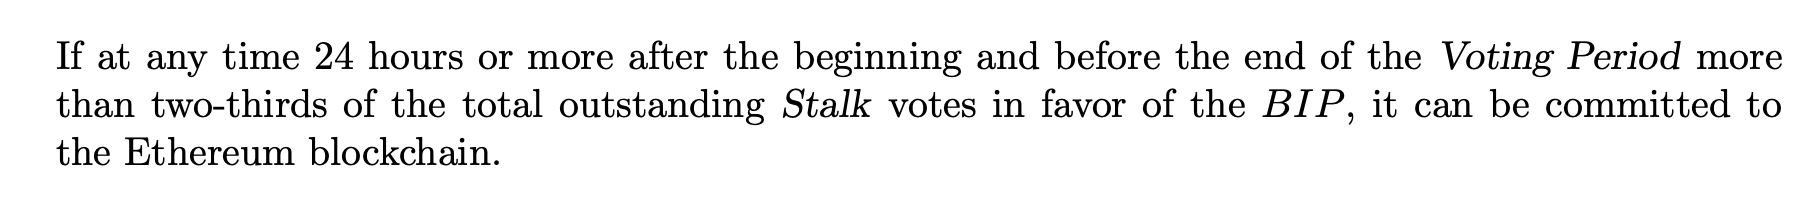 From the Beanstalk whitepaper, this excerpt defines the "emergency commit" scenario.